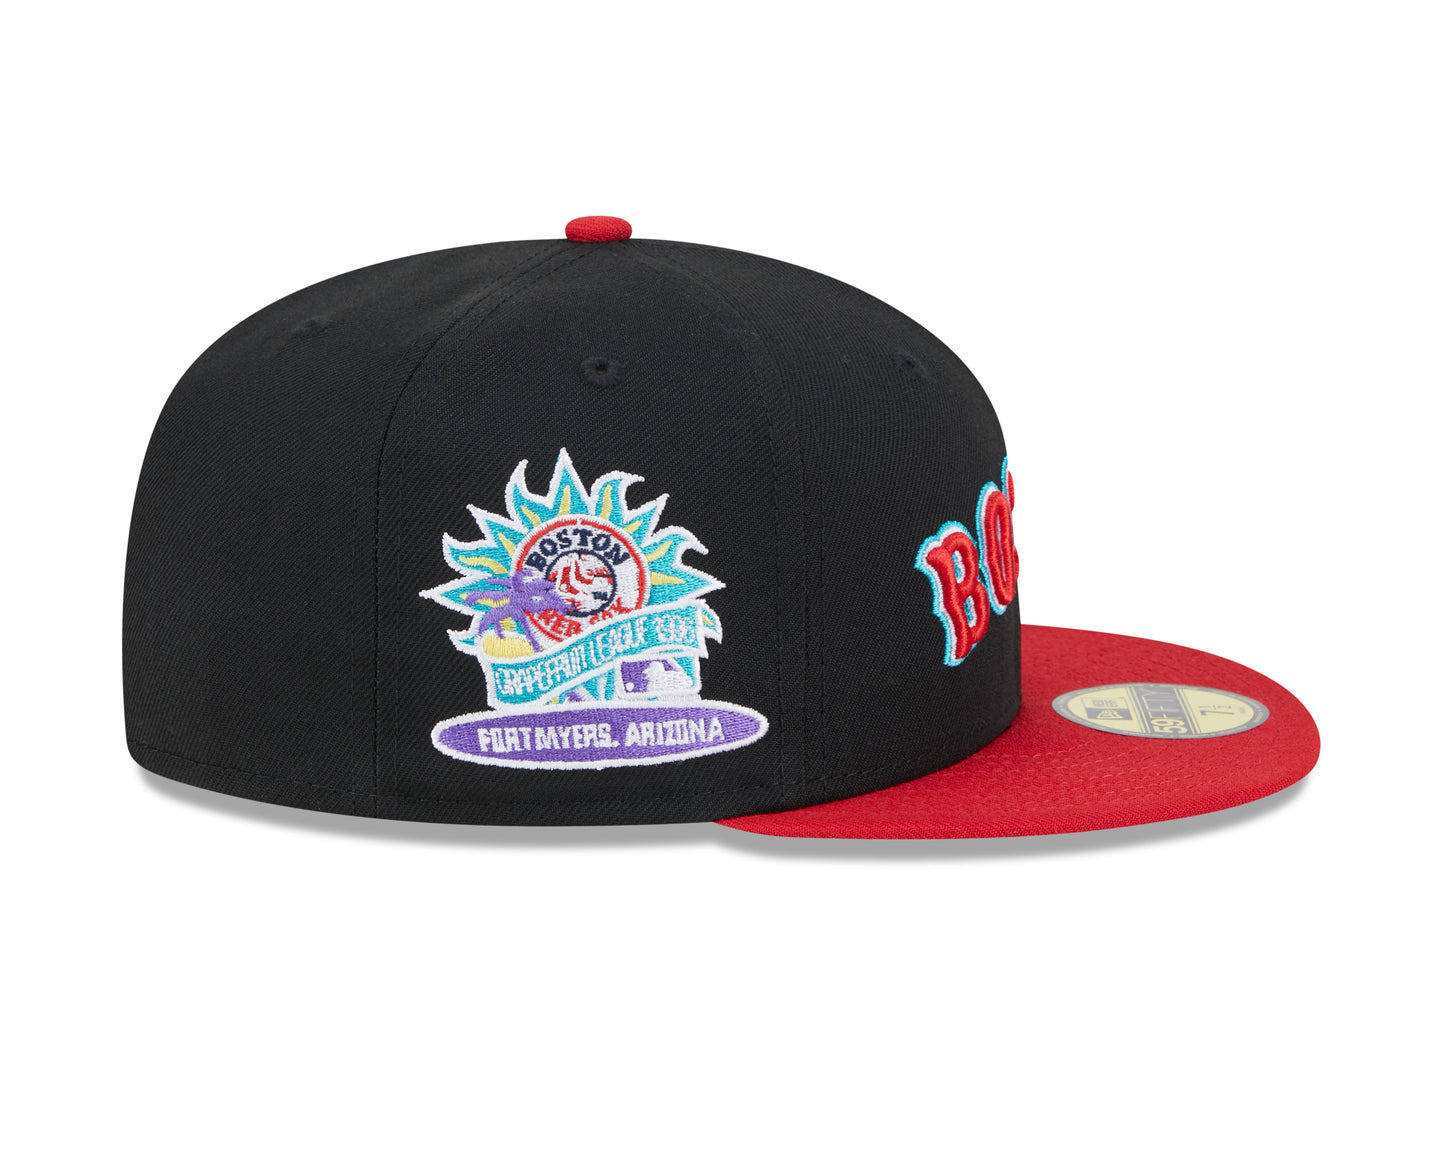 New Era - 59fifty Fitted Cap - Boston Red Sox - RETRO SPRING TRAINING - Black - Headz Up 